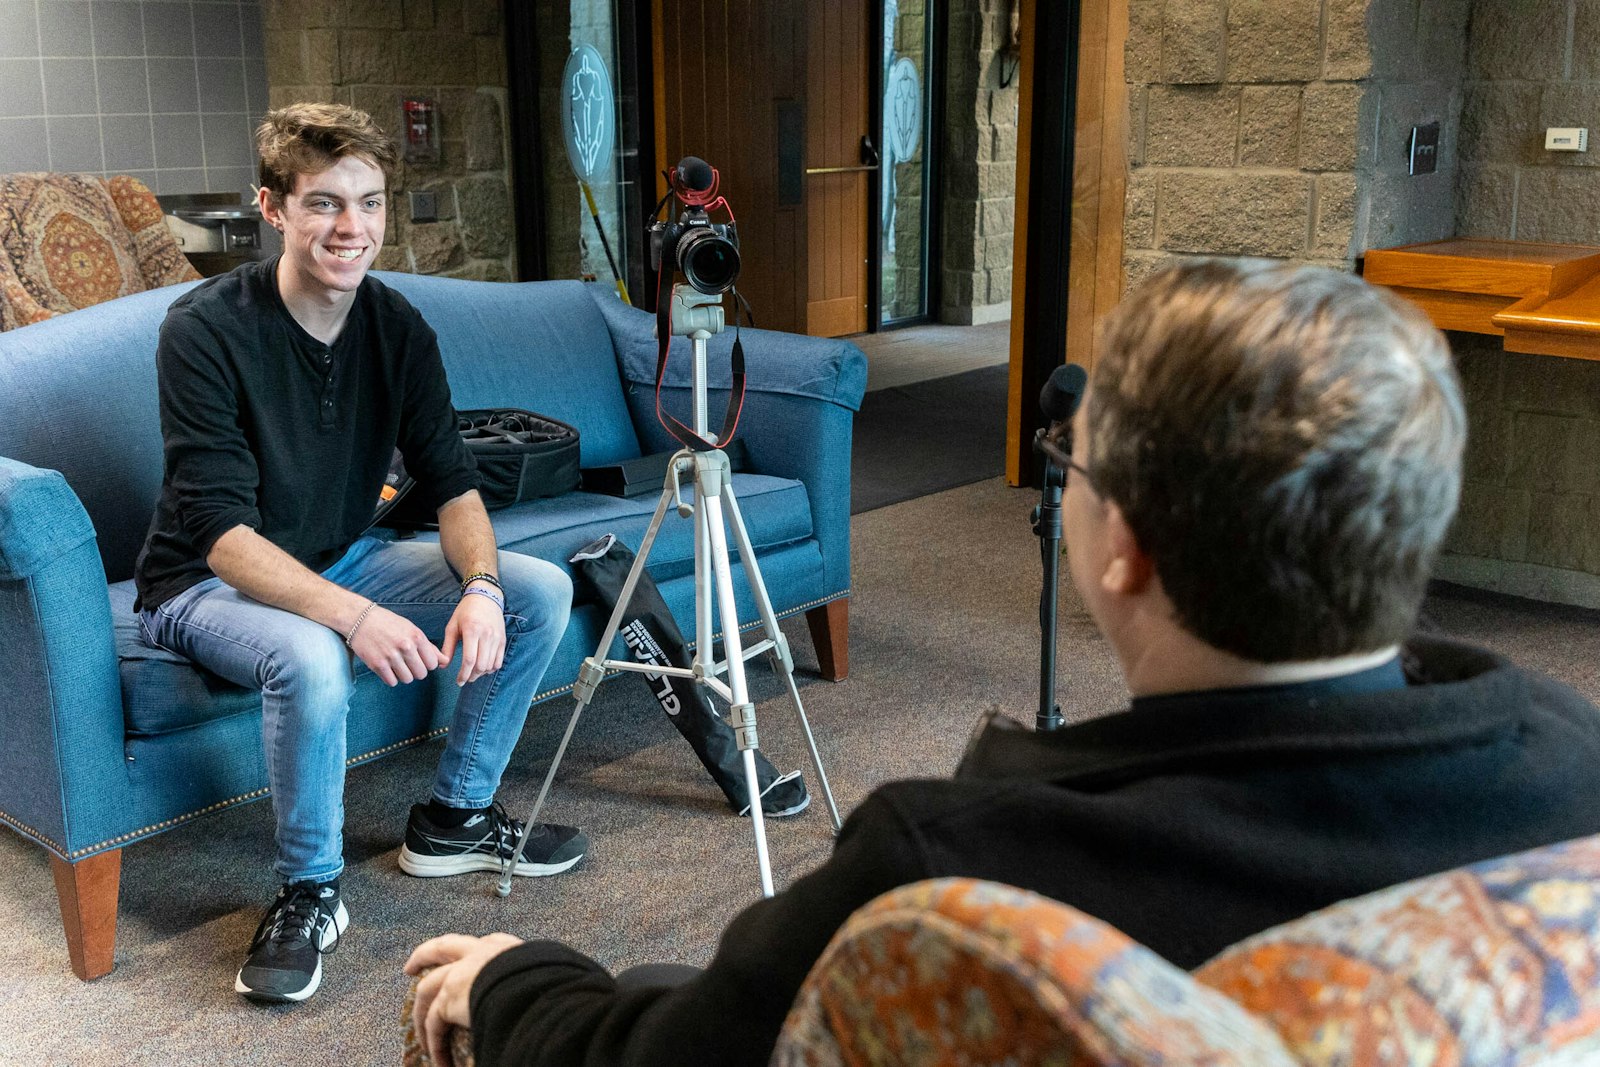 Jacob Sasak interviews Fr. Jim Kean as part of his four-part docuseries, "The Life of a Priest," at St. Joseph the Worker Parish in Lake Orion. Sasak hopes to use his talents as a videographer to "give glory to God" and to inspire others to do the same.